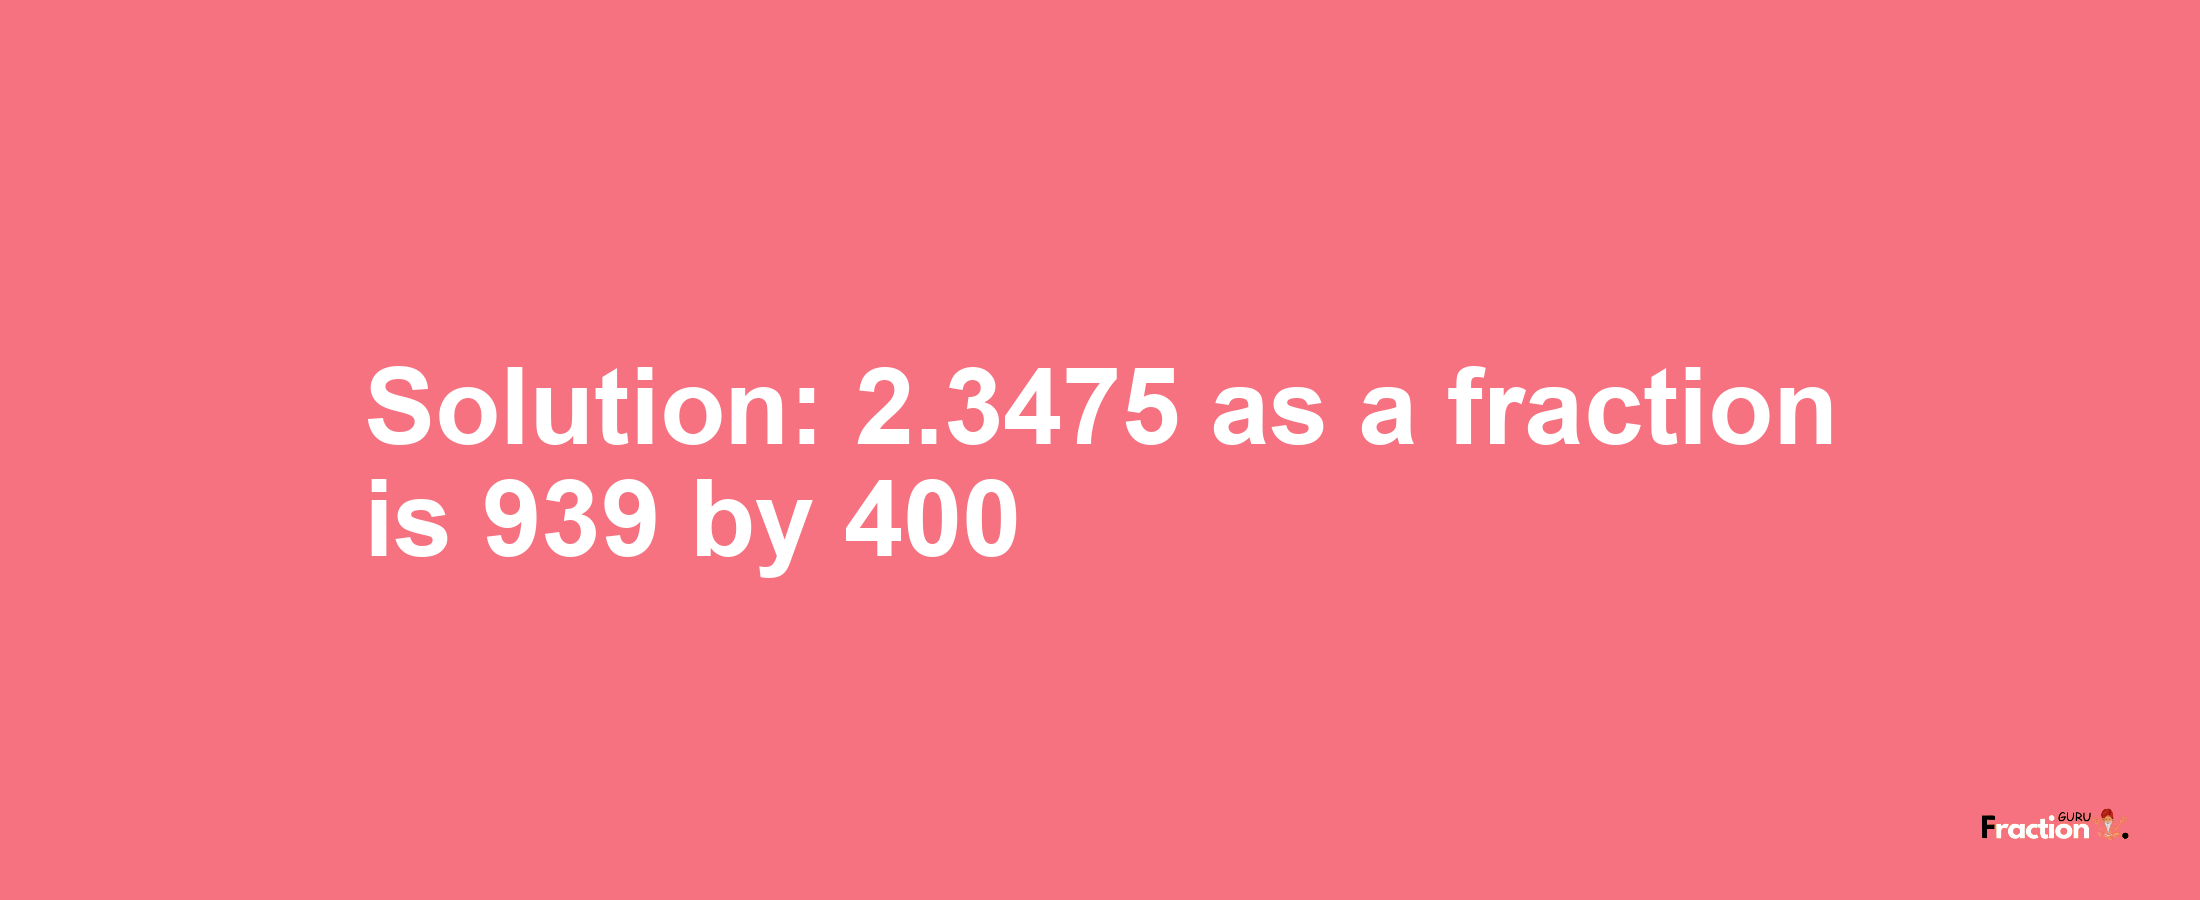 Solution:2.3475 as a fraction is 939/400